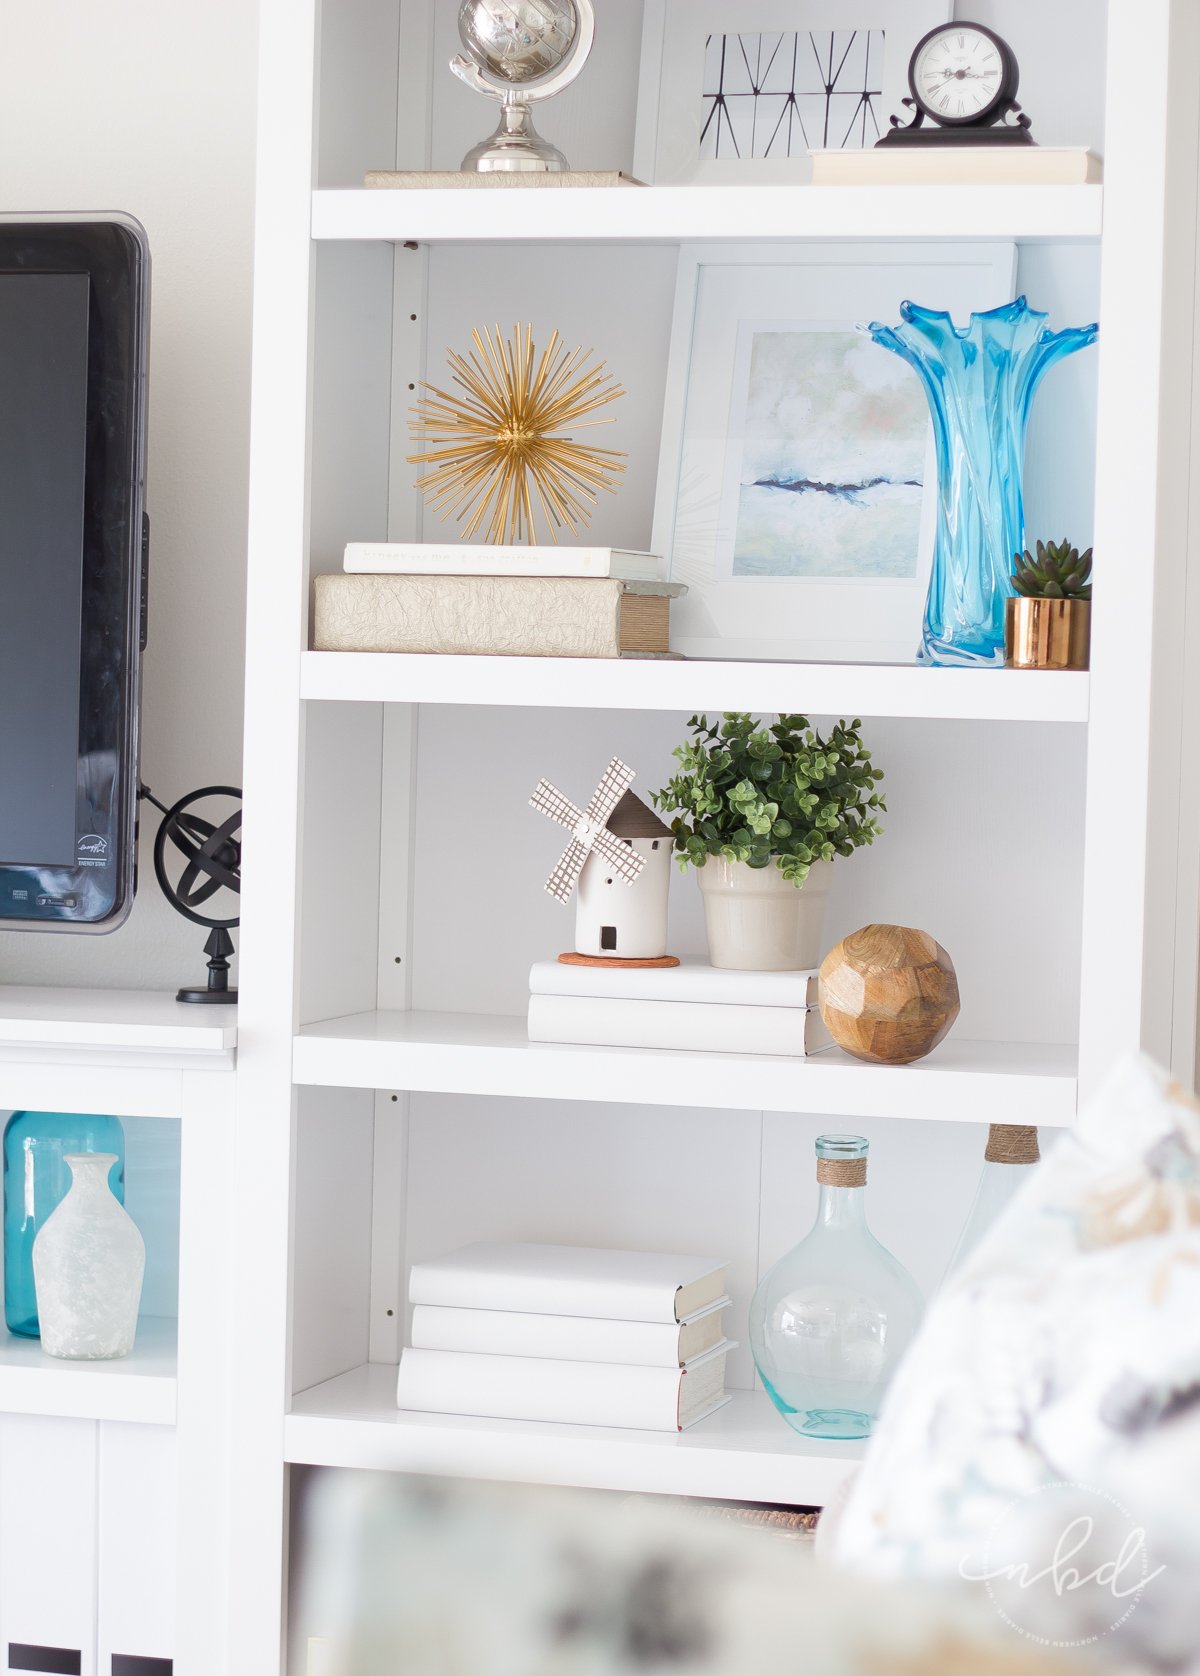 Have you ever stared at gorgeous bookshelves on Pinterest and wondered how to recreate the look in your own home? Here's the secret to styling bookshelves! #bookshelfstylingclass #decor